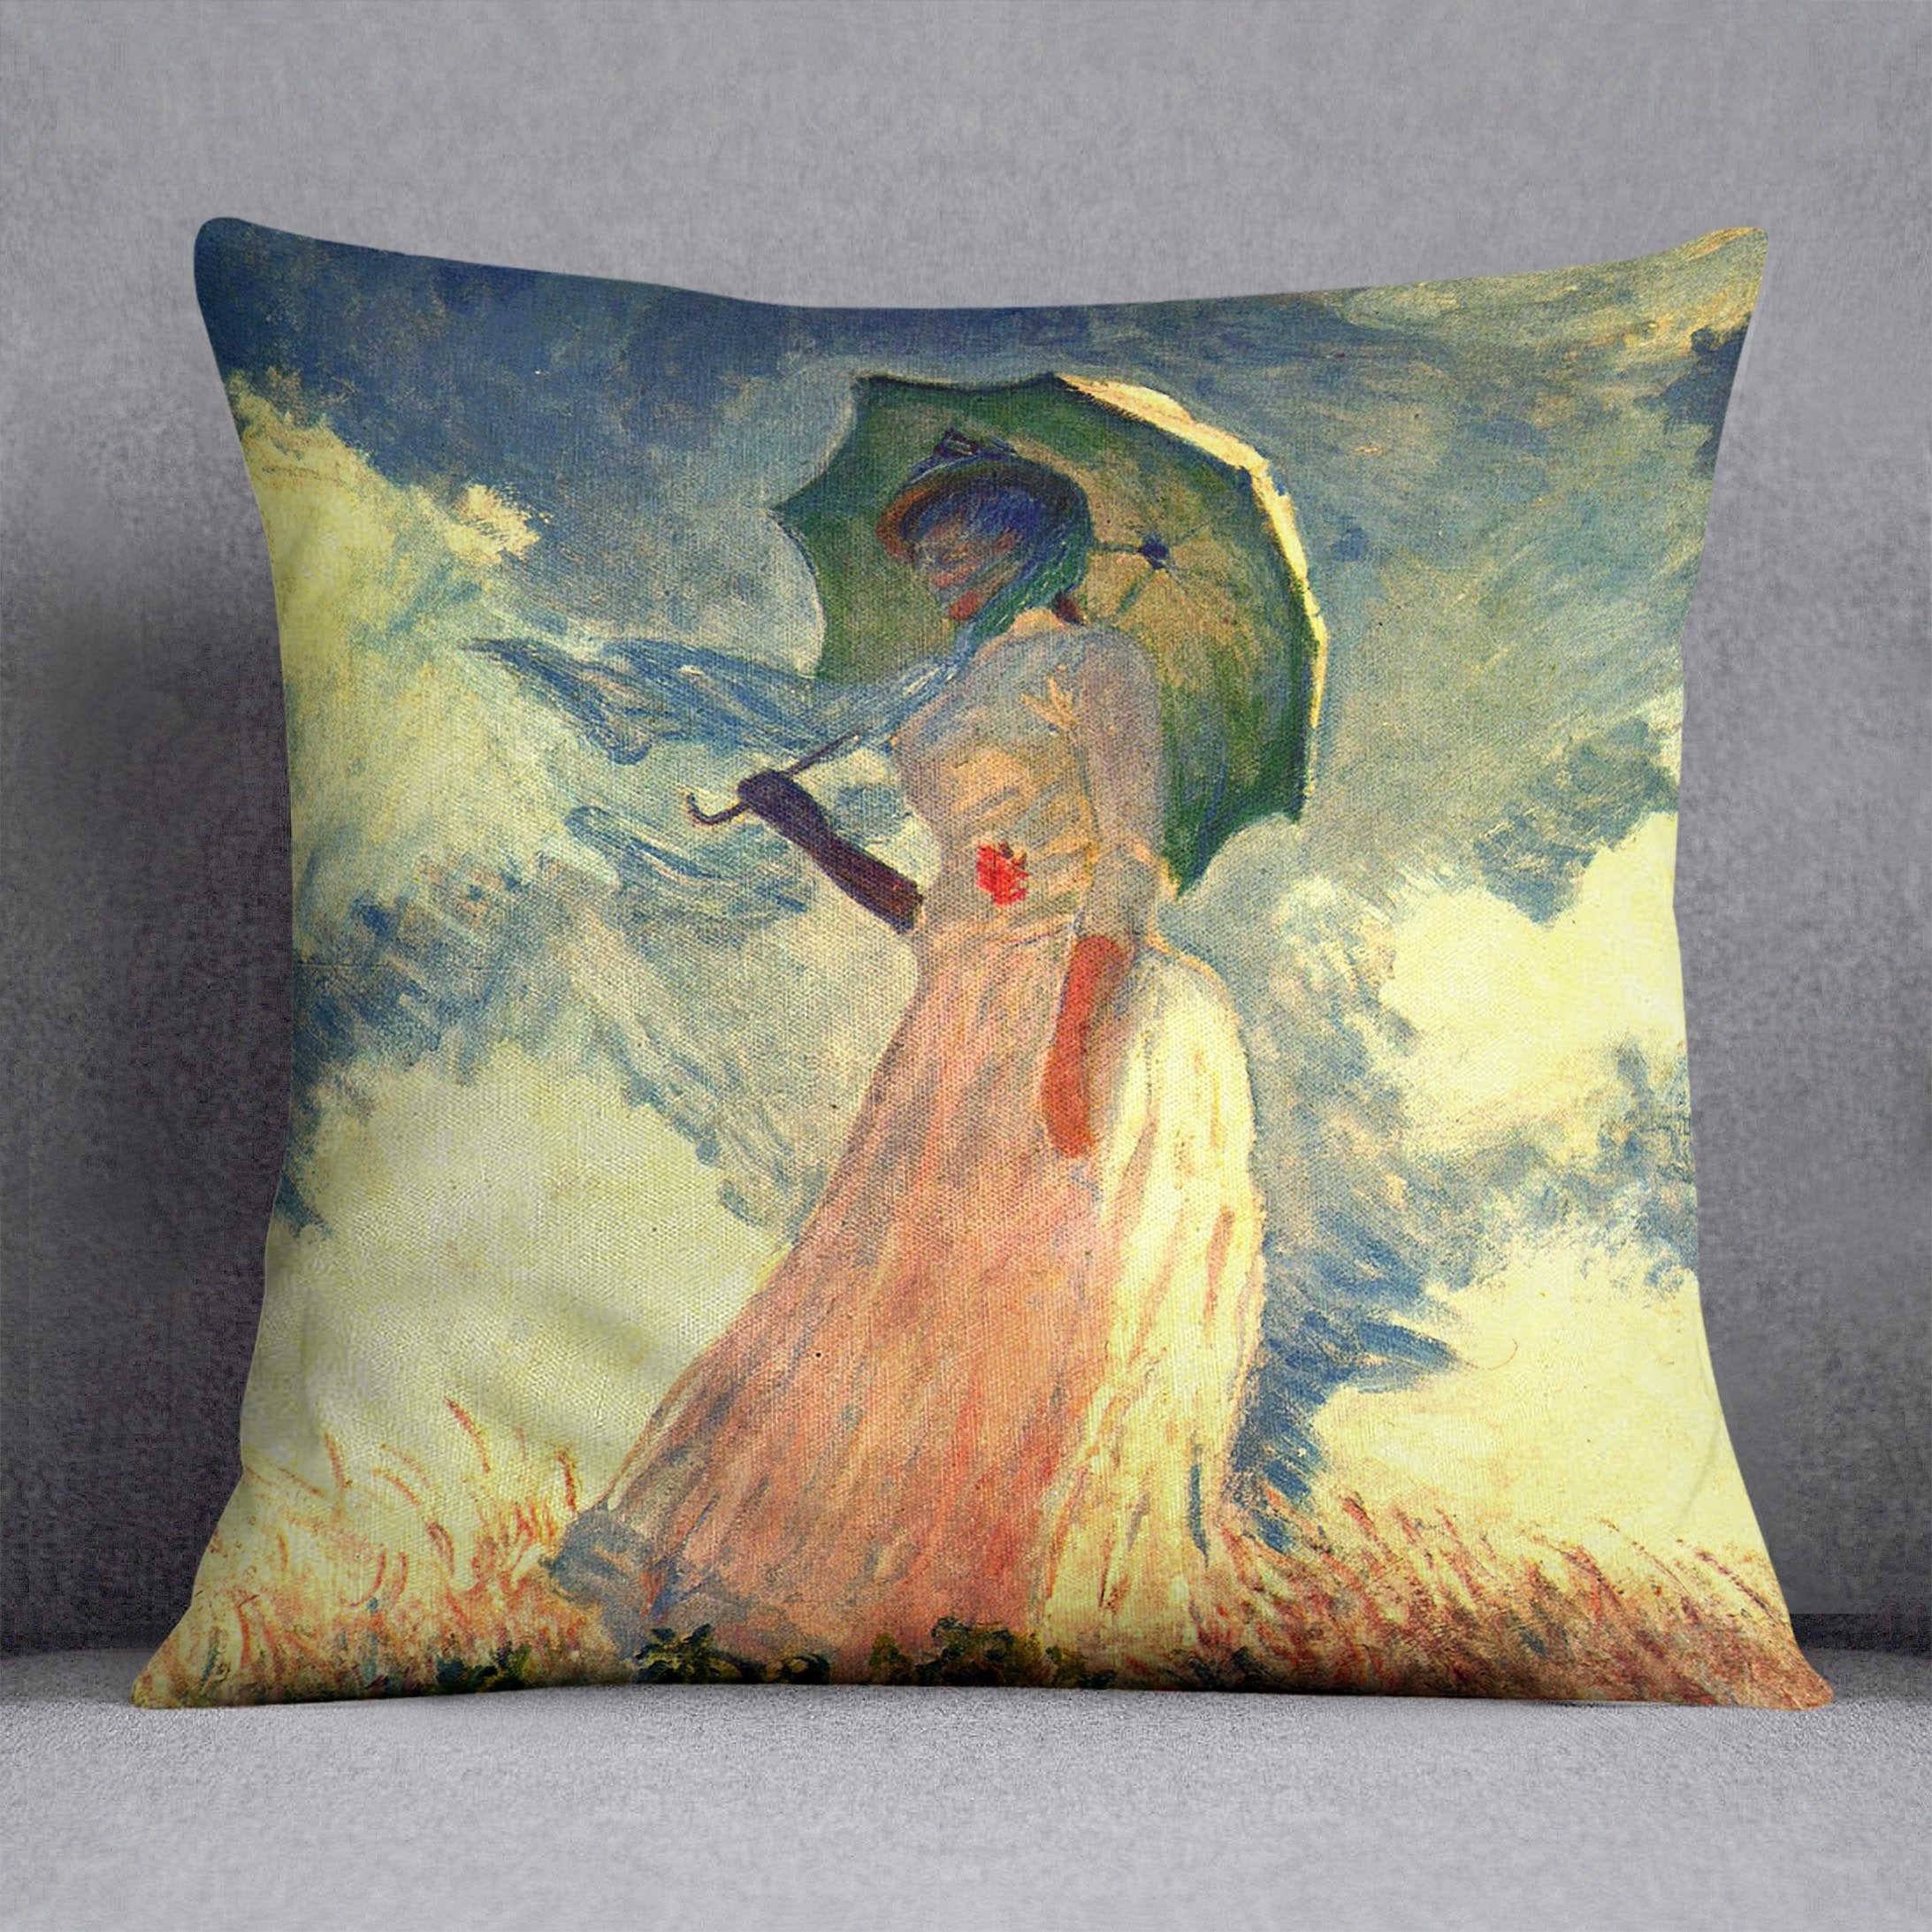 Woman with sunshade by Monet Throw Pillow